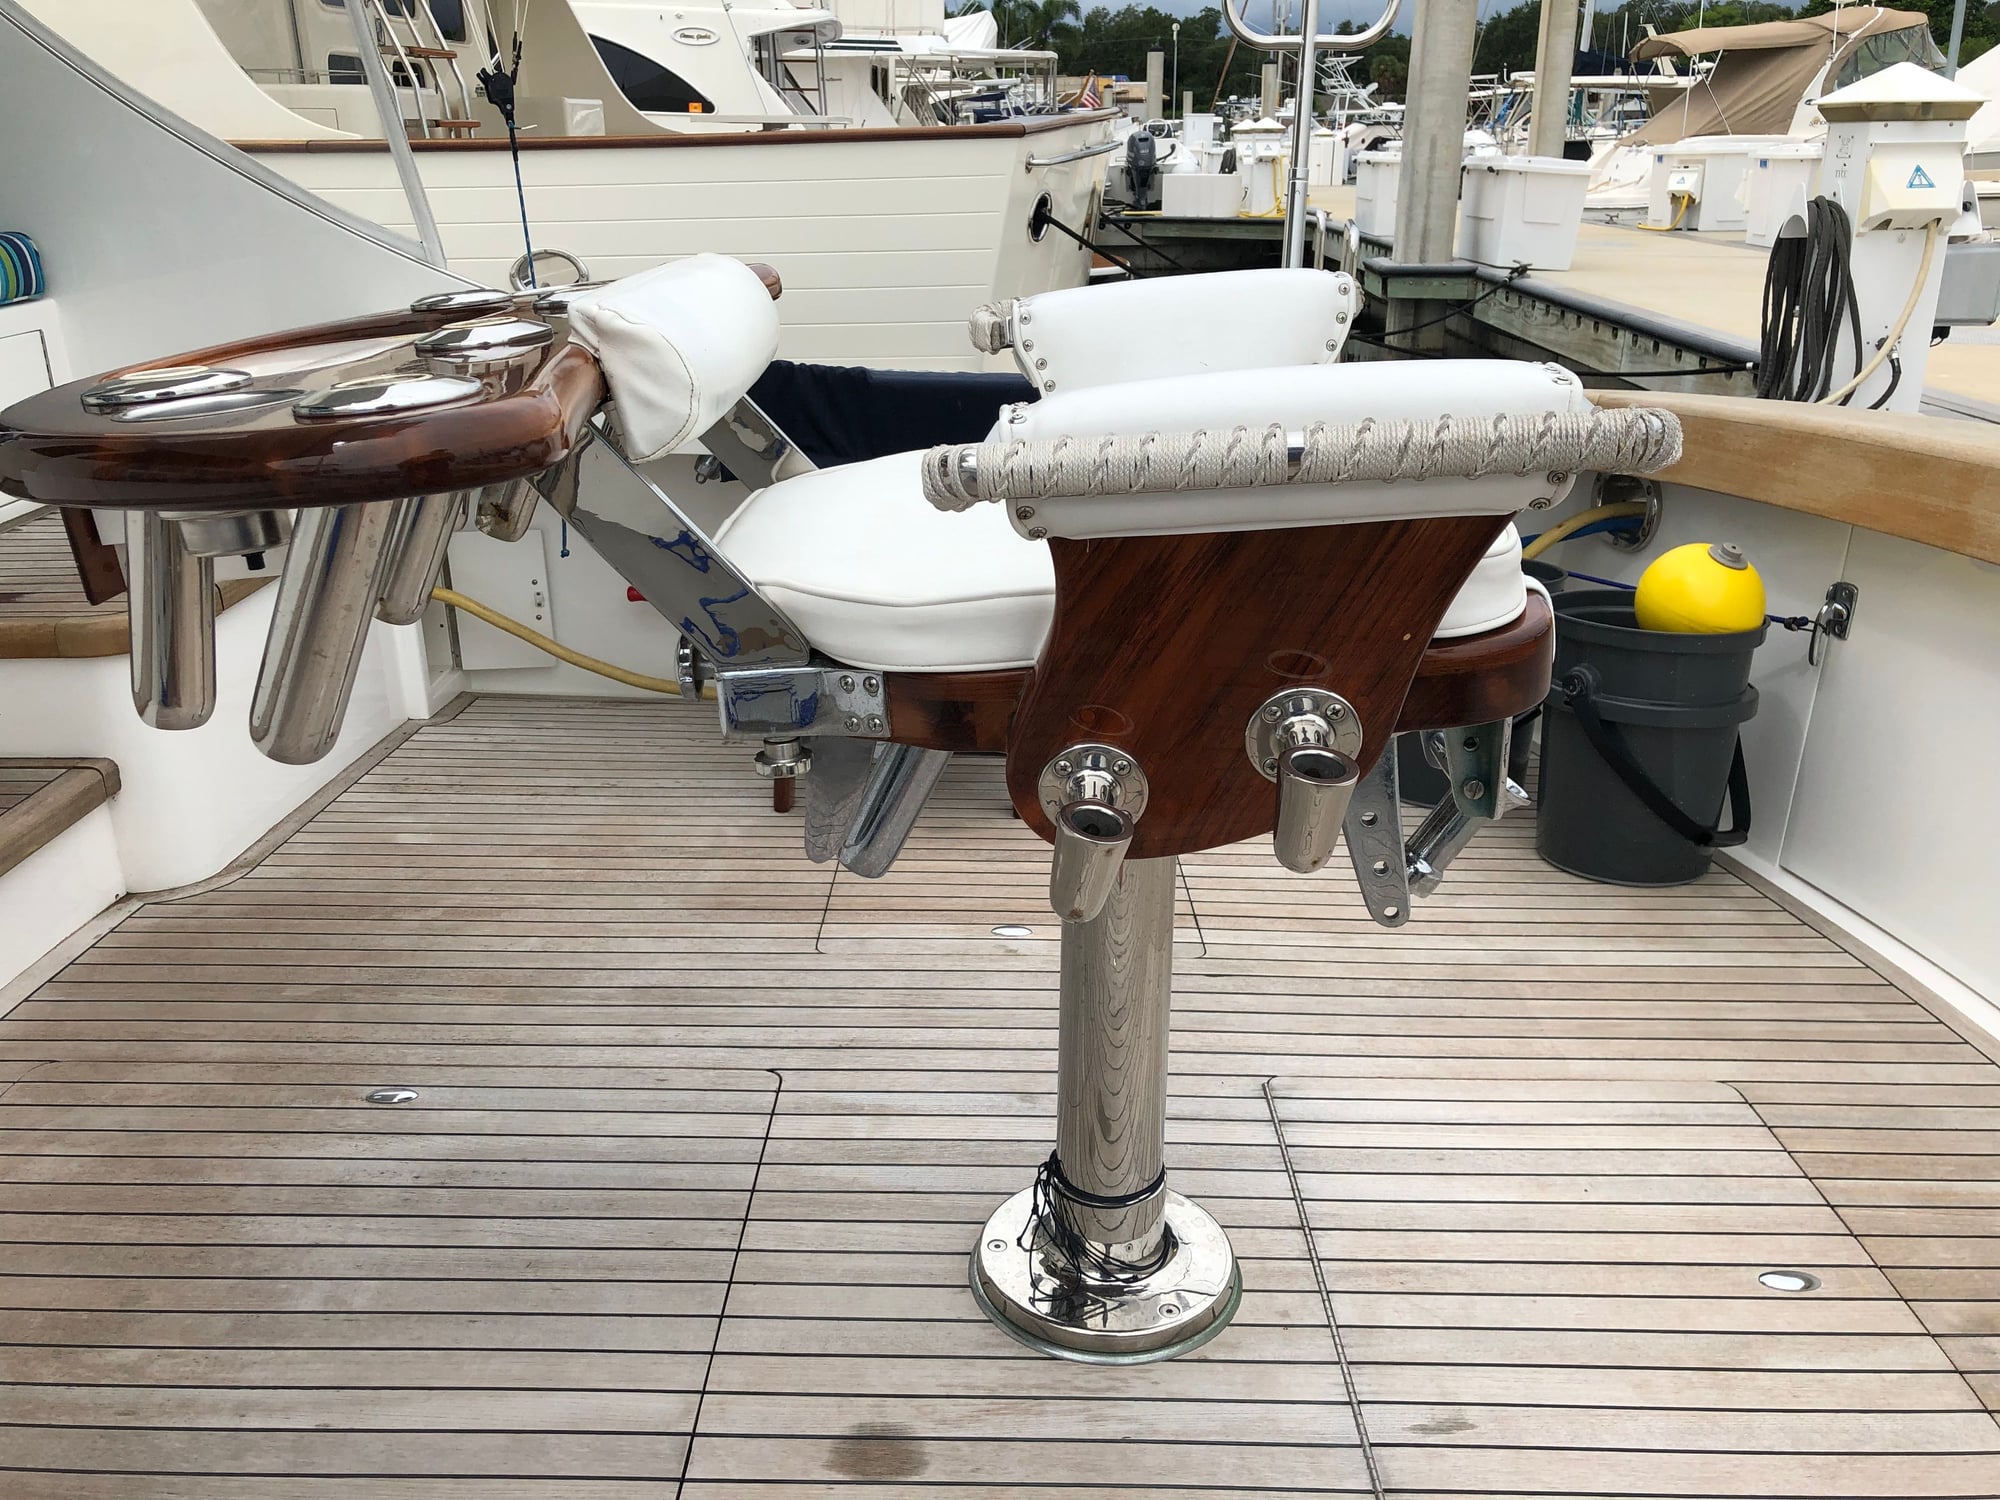 Fighting Chair - Picture of Abyss Fishing Charter, Rovinj